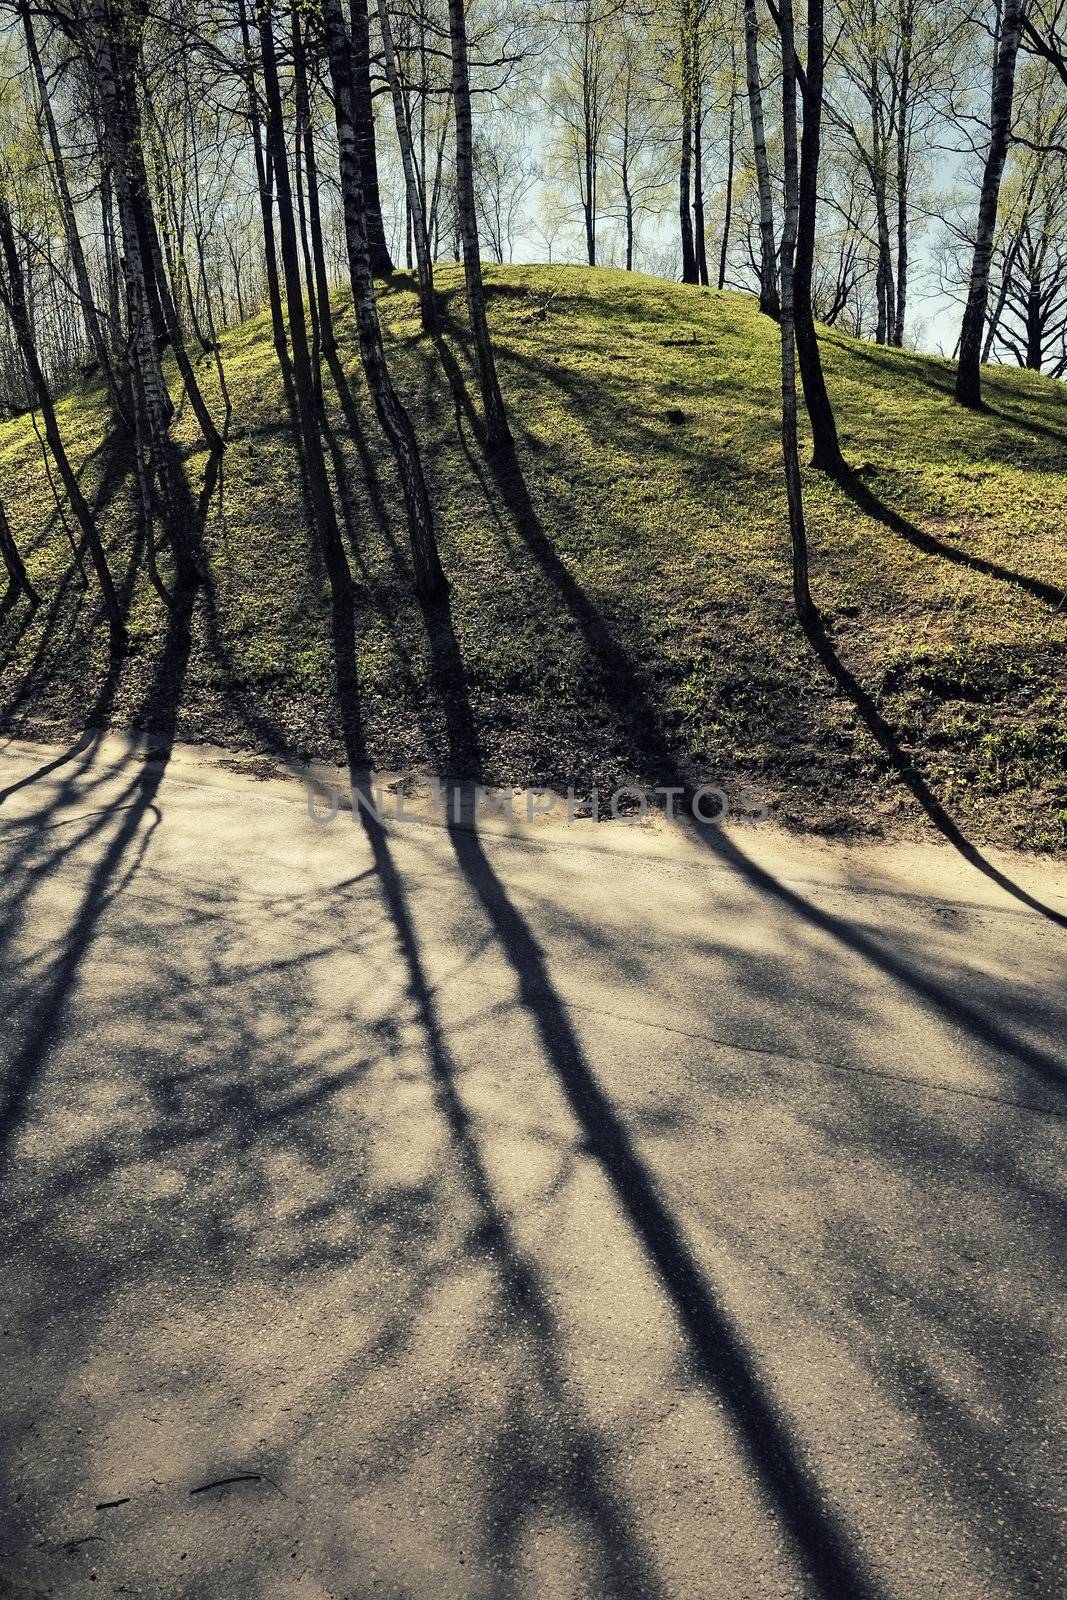 Trees on a hill casting shadows on a road